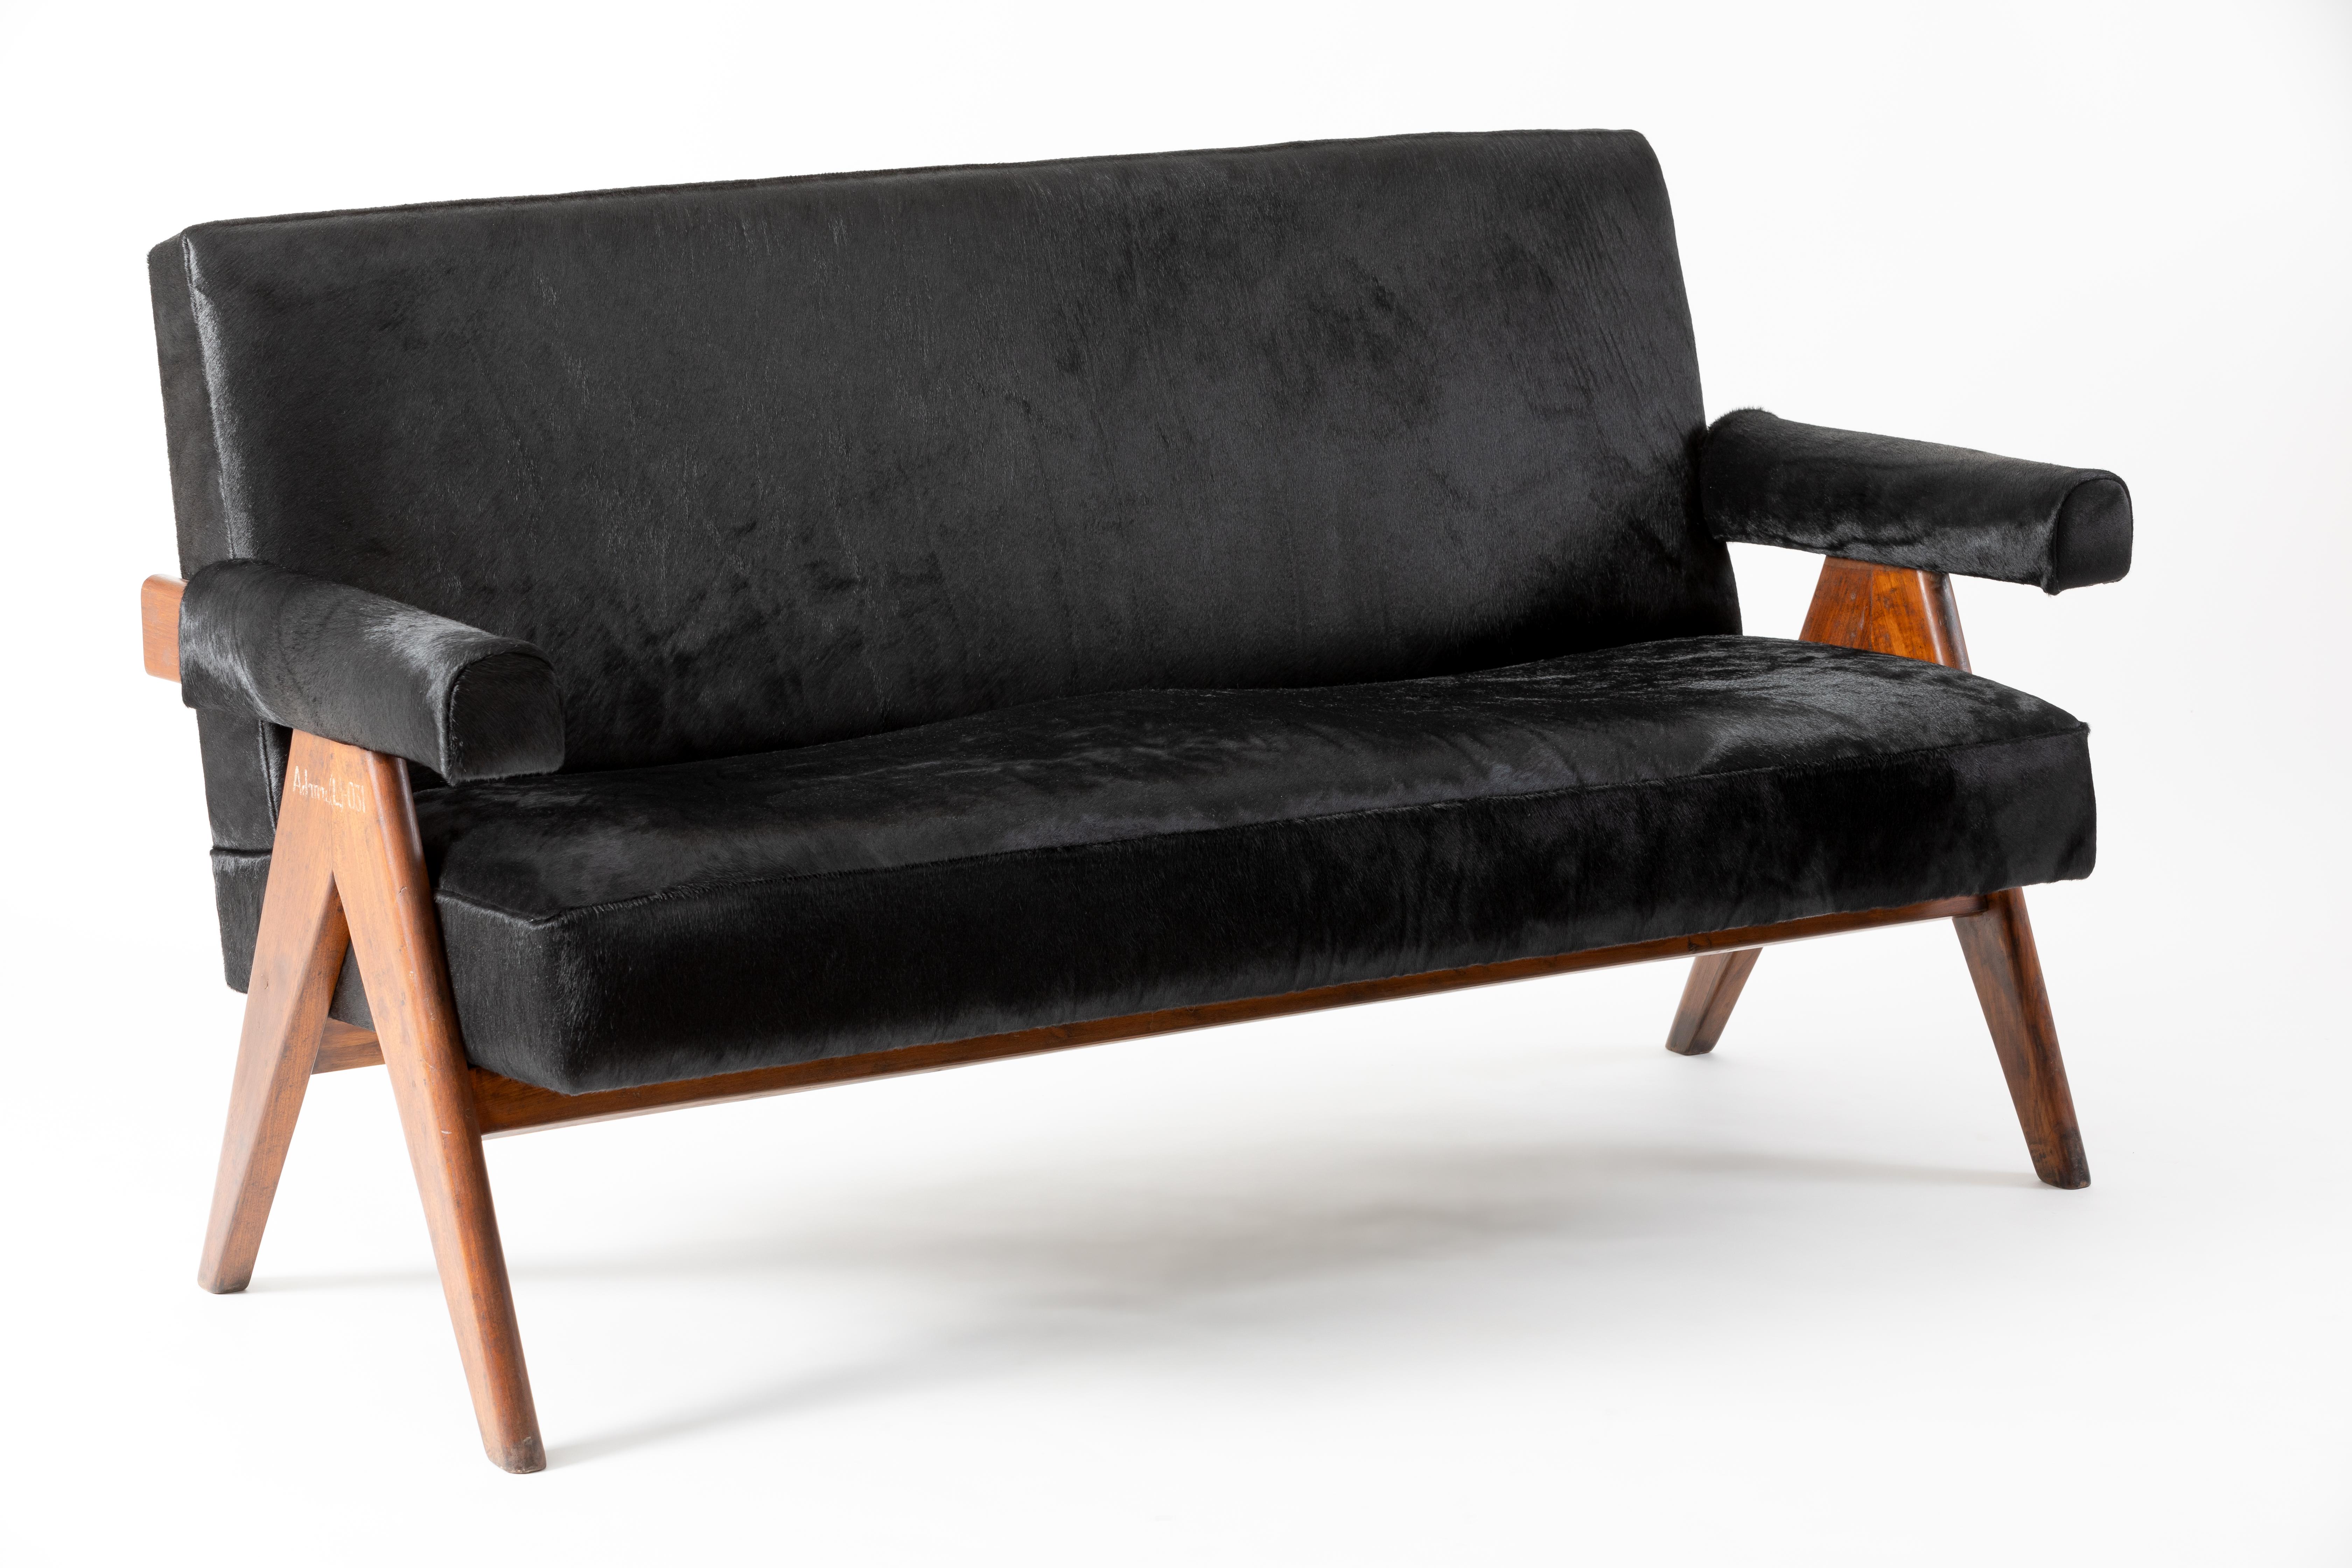 Original Pierre Jeanneret v-leg sofa set with 2 armchairs in black hide (Admn.(L.)031)
Swiss-born architect and furniture designer Pierre Jeanneret (1896-1967) worked for most of his life alongside his cousin Le Corbusier. In 1926 they published